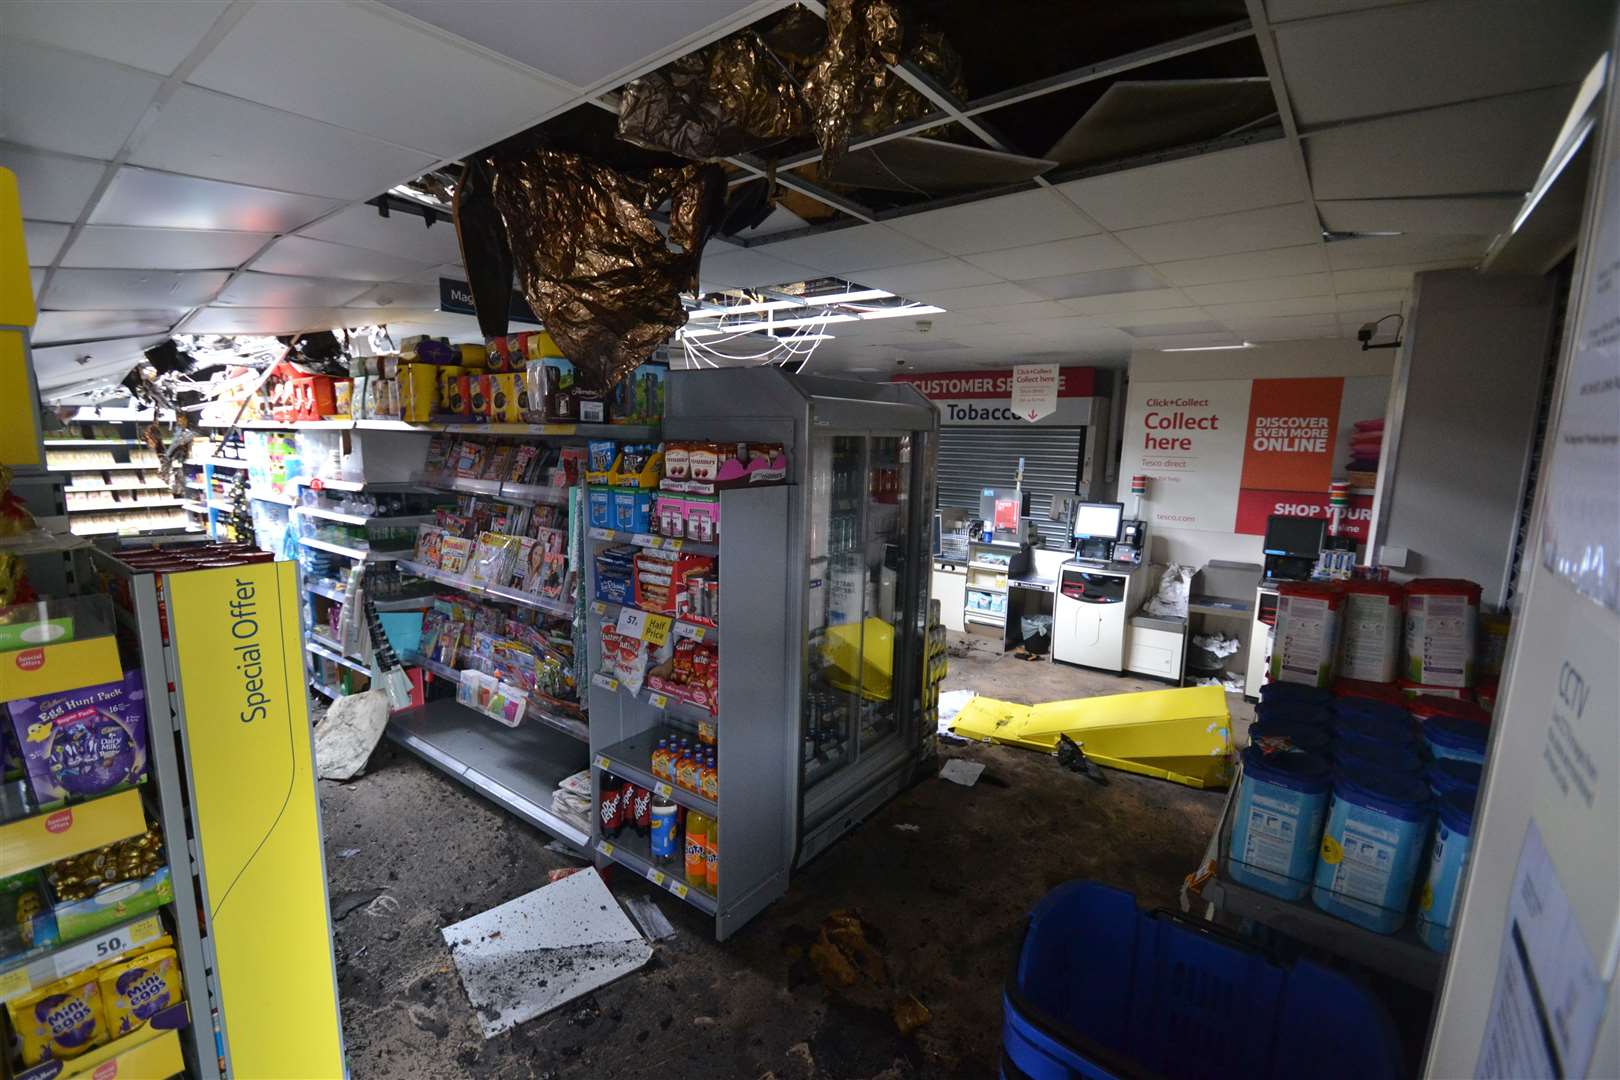 The inside of the wrecked Tesco Express store in Mace Lane, Ashford in 2017. Picture: Steve Salter